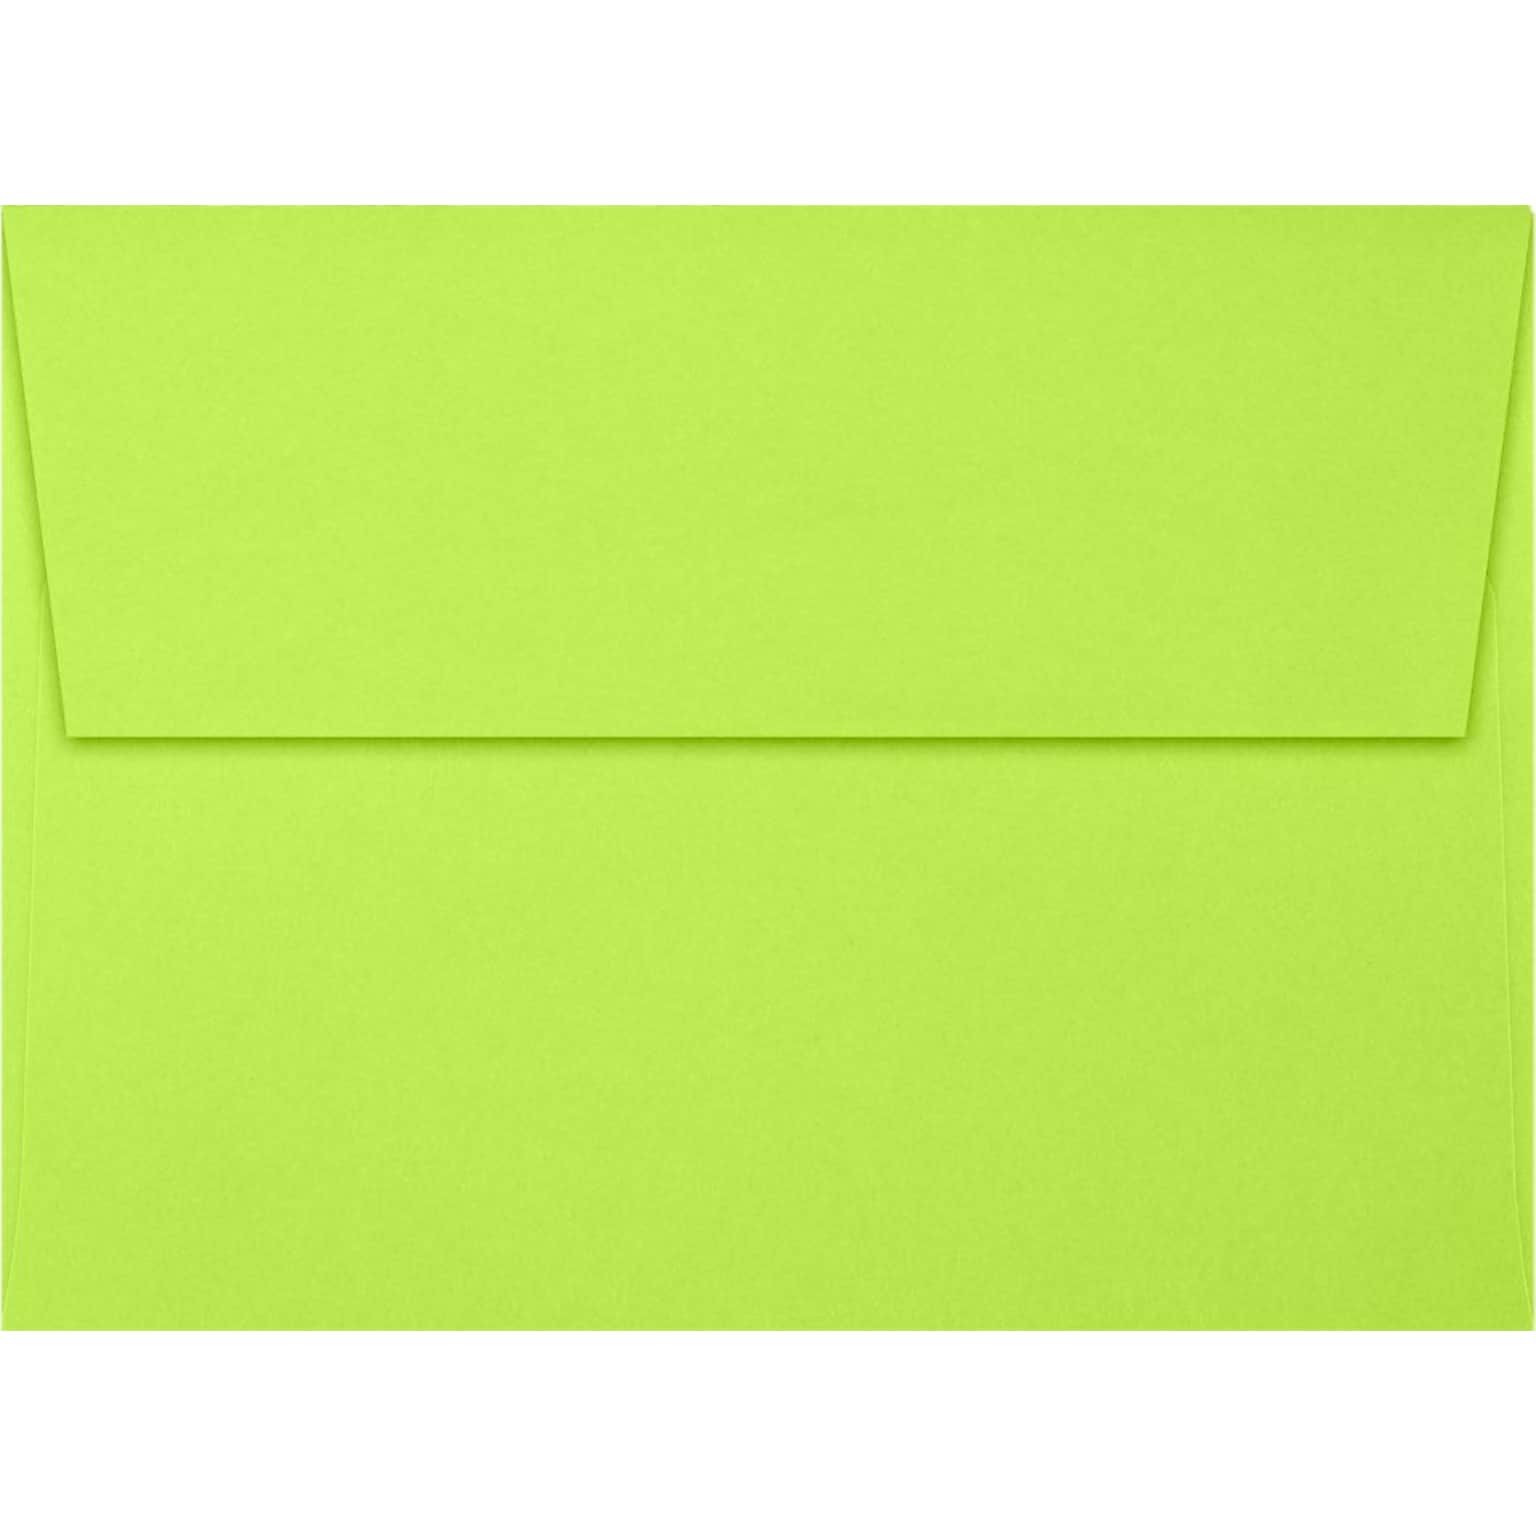 LUX A2 Invitation Envelopes (4 3/8 x 5 3/4) 50/Pack, Electric Green (4870-ULIM-50)